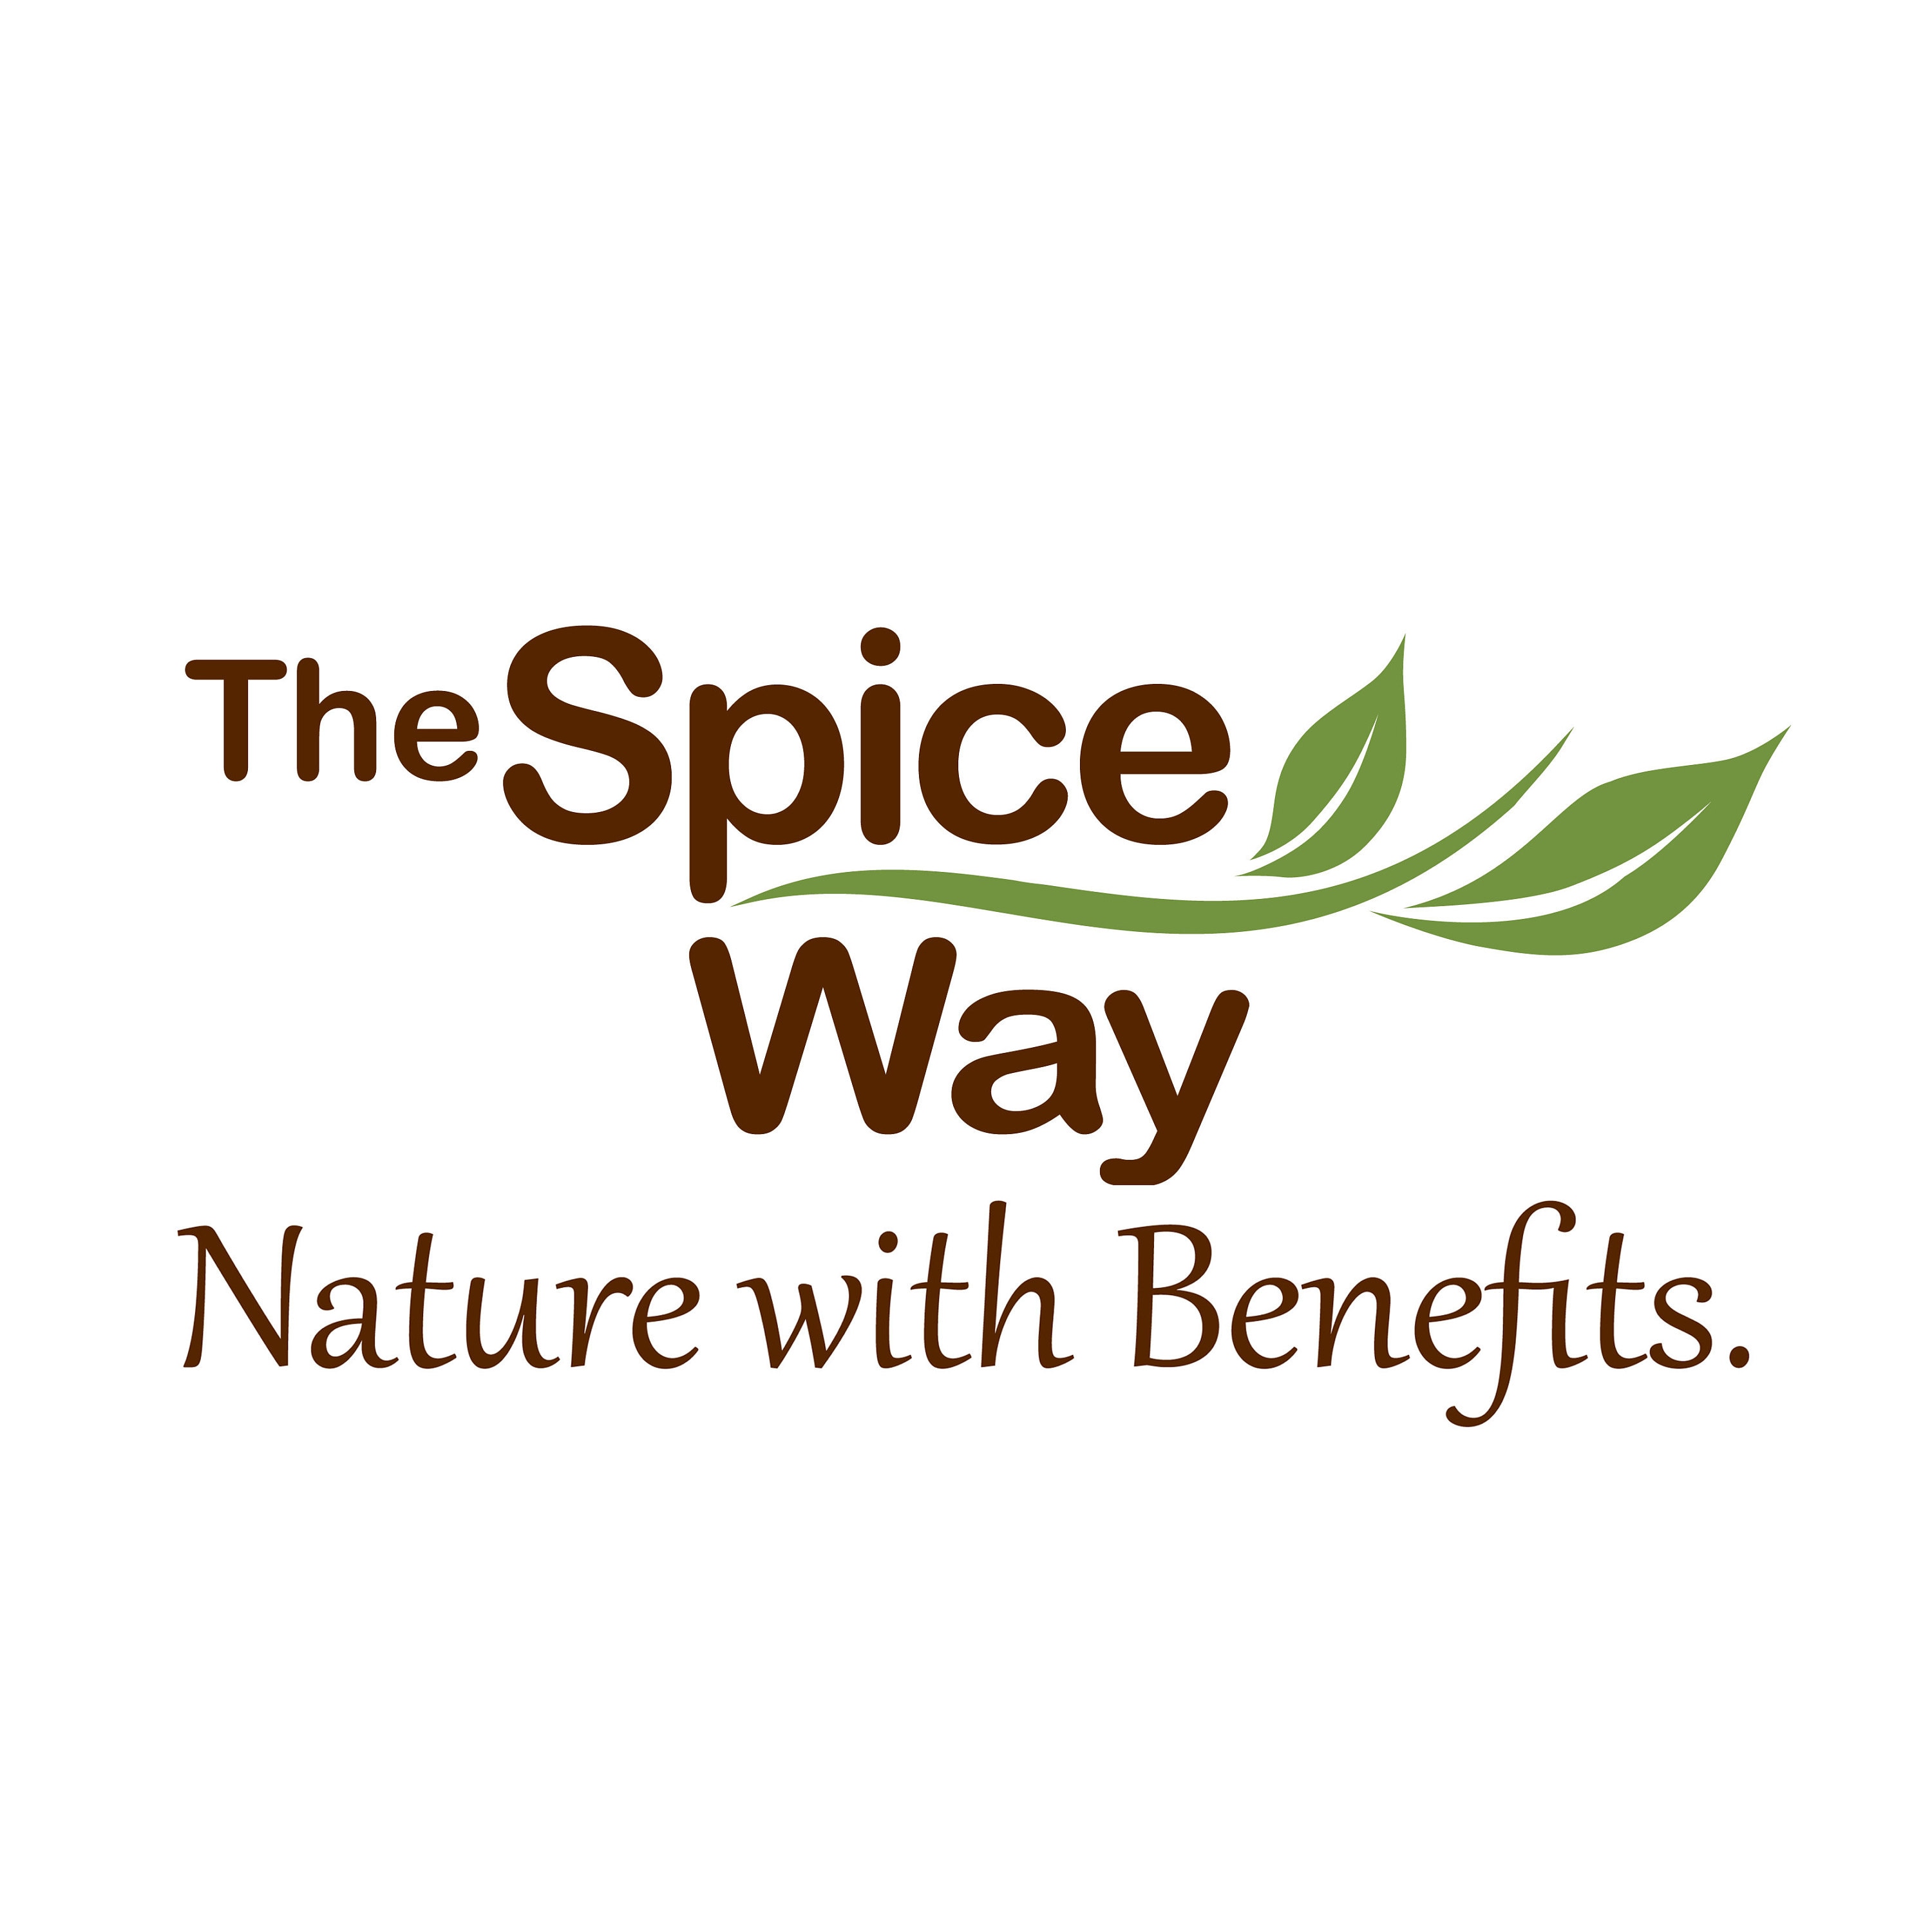 Sumac Powder - The Spice Way – The Spice Way - Nature with Benefits